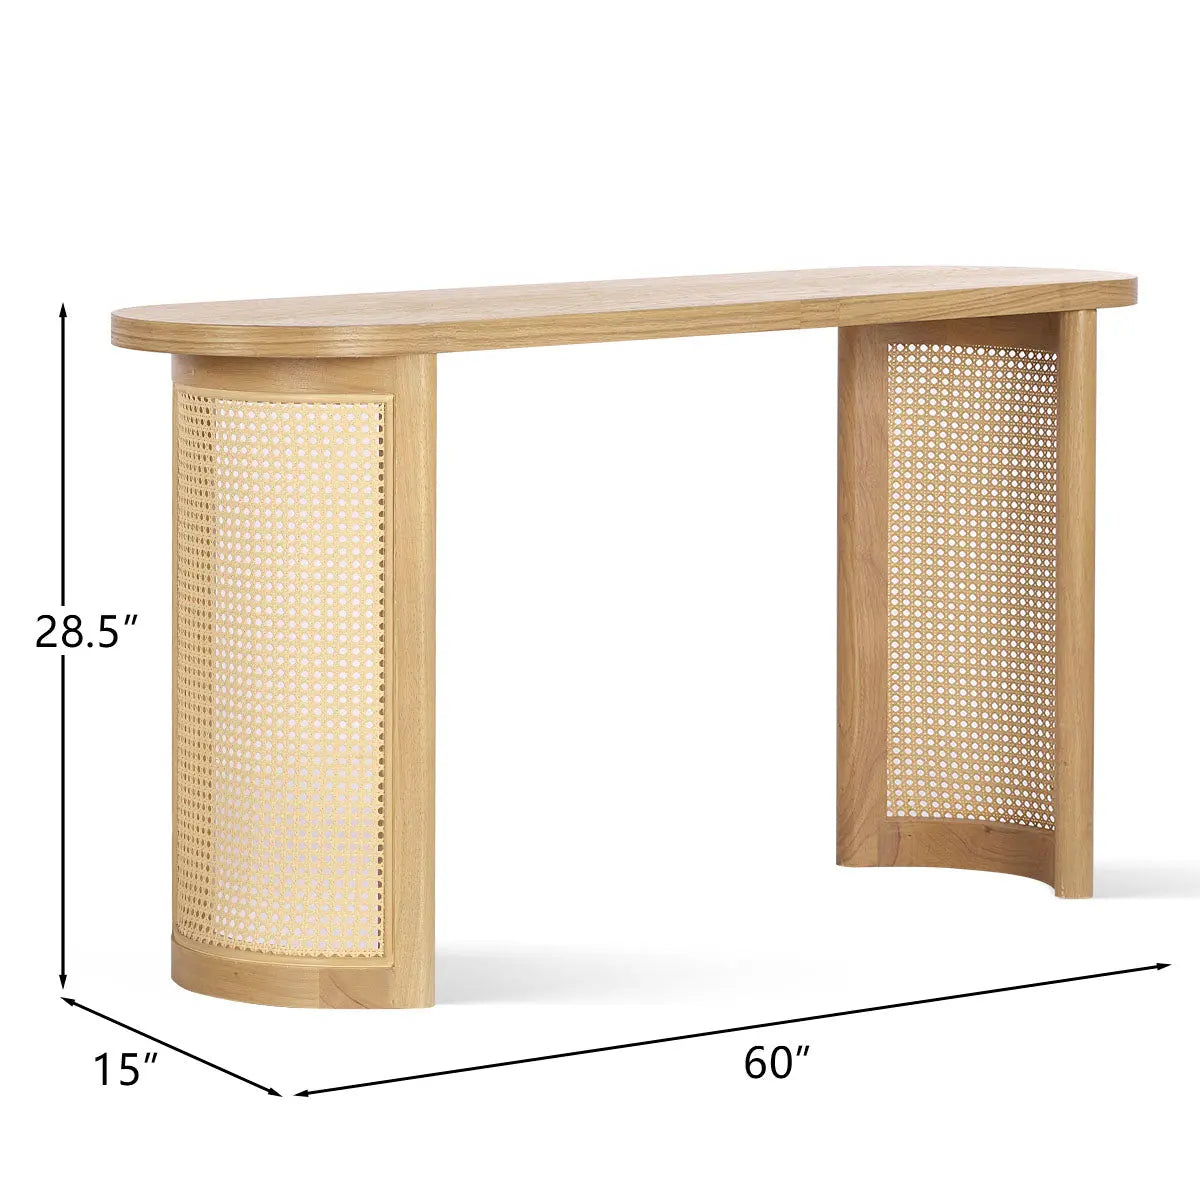 Aodai 60" Wooden Console Table The Pop Maison